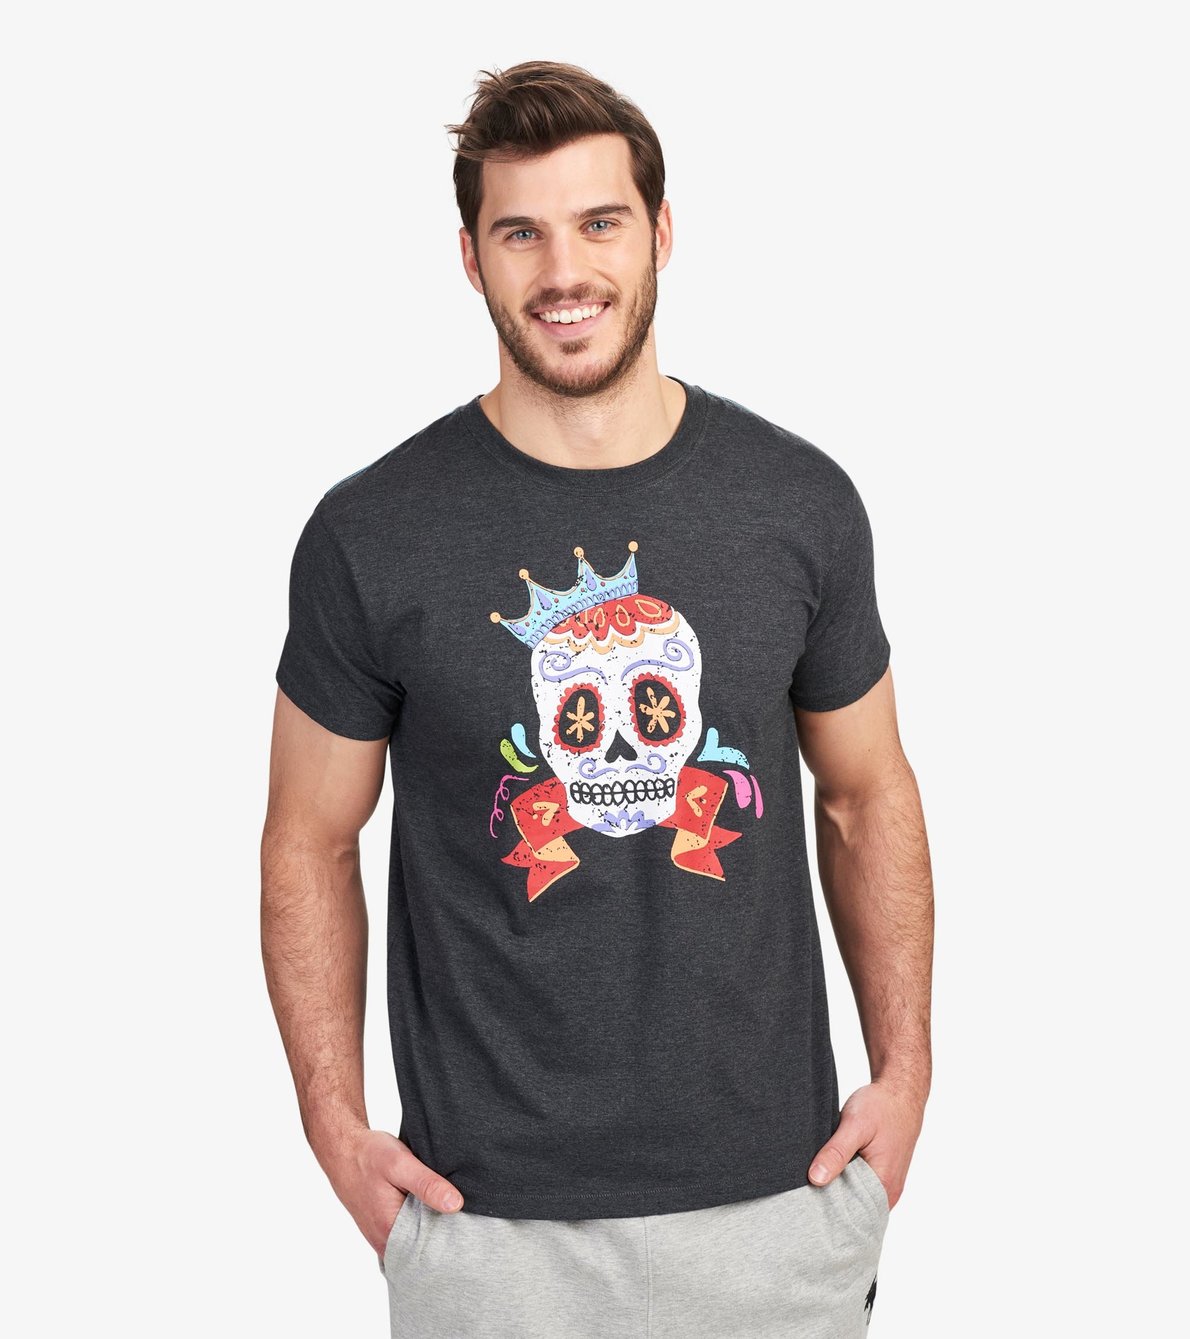 View larger image of "Day Of The Dead" Men's Tee